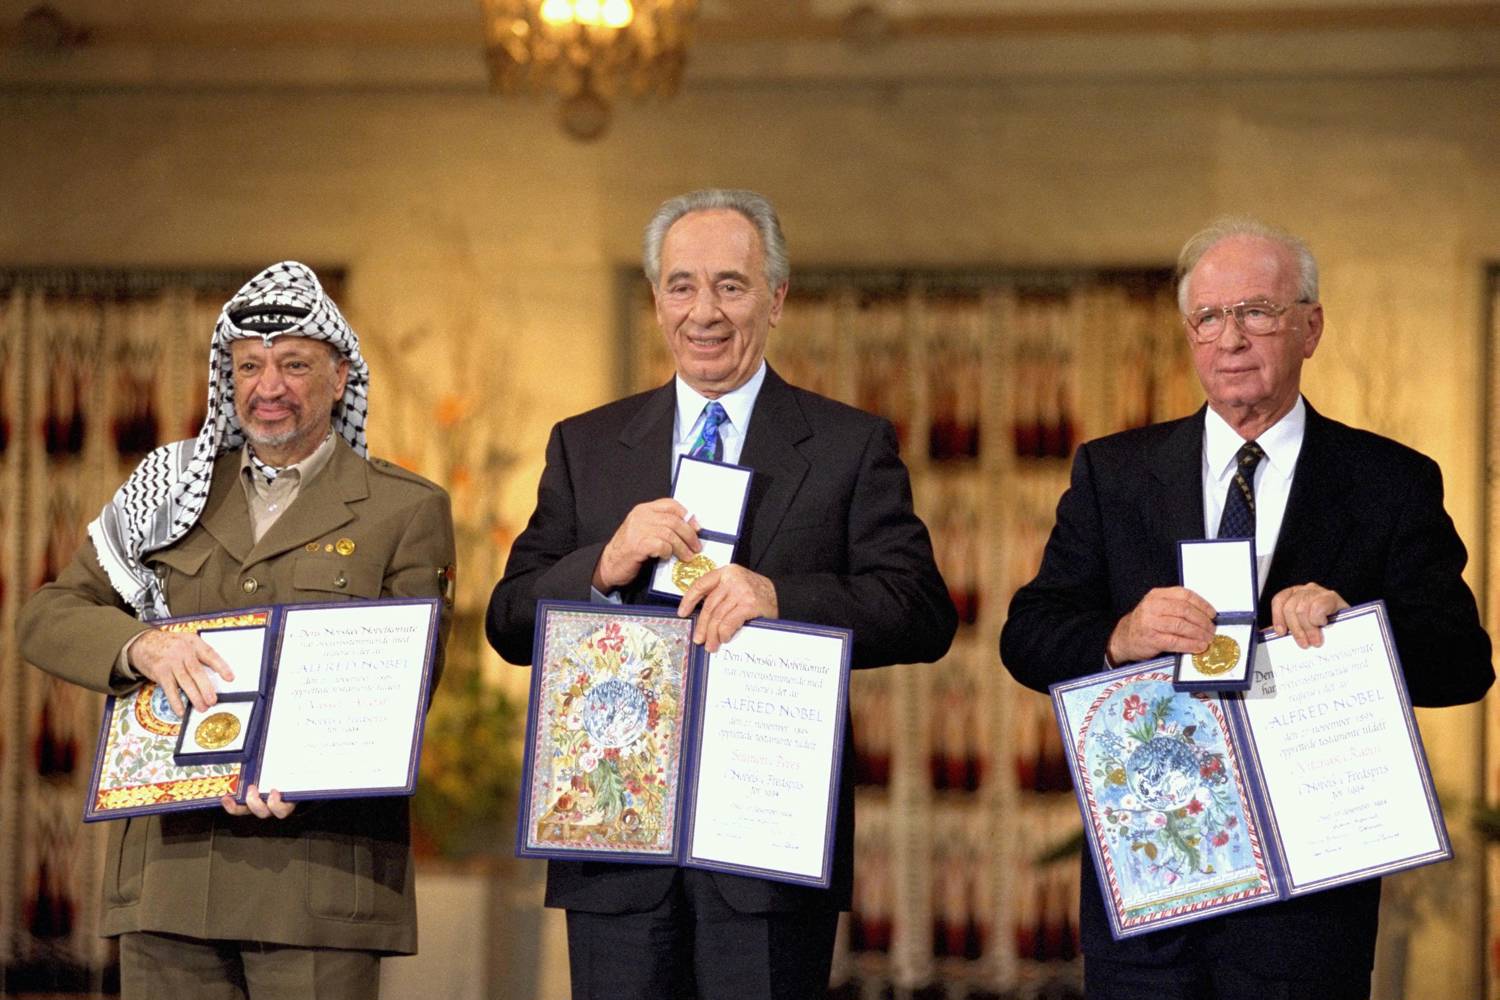 The Nobel Peace Prize laureates for 1994 in Oslo. From left to right: PLO Chairman Yasser Arafat, Israeli Foreign Minister Shimon Peres, Israeli Prime Minister Yitzhak Rabin. Photo: Saar Yaacov, Israeli Government Press Office.